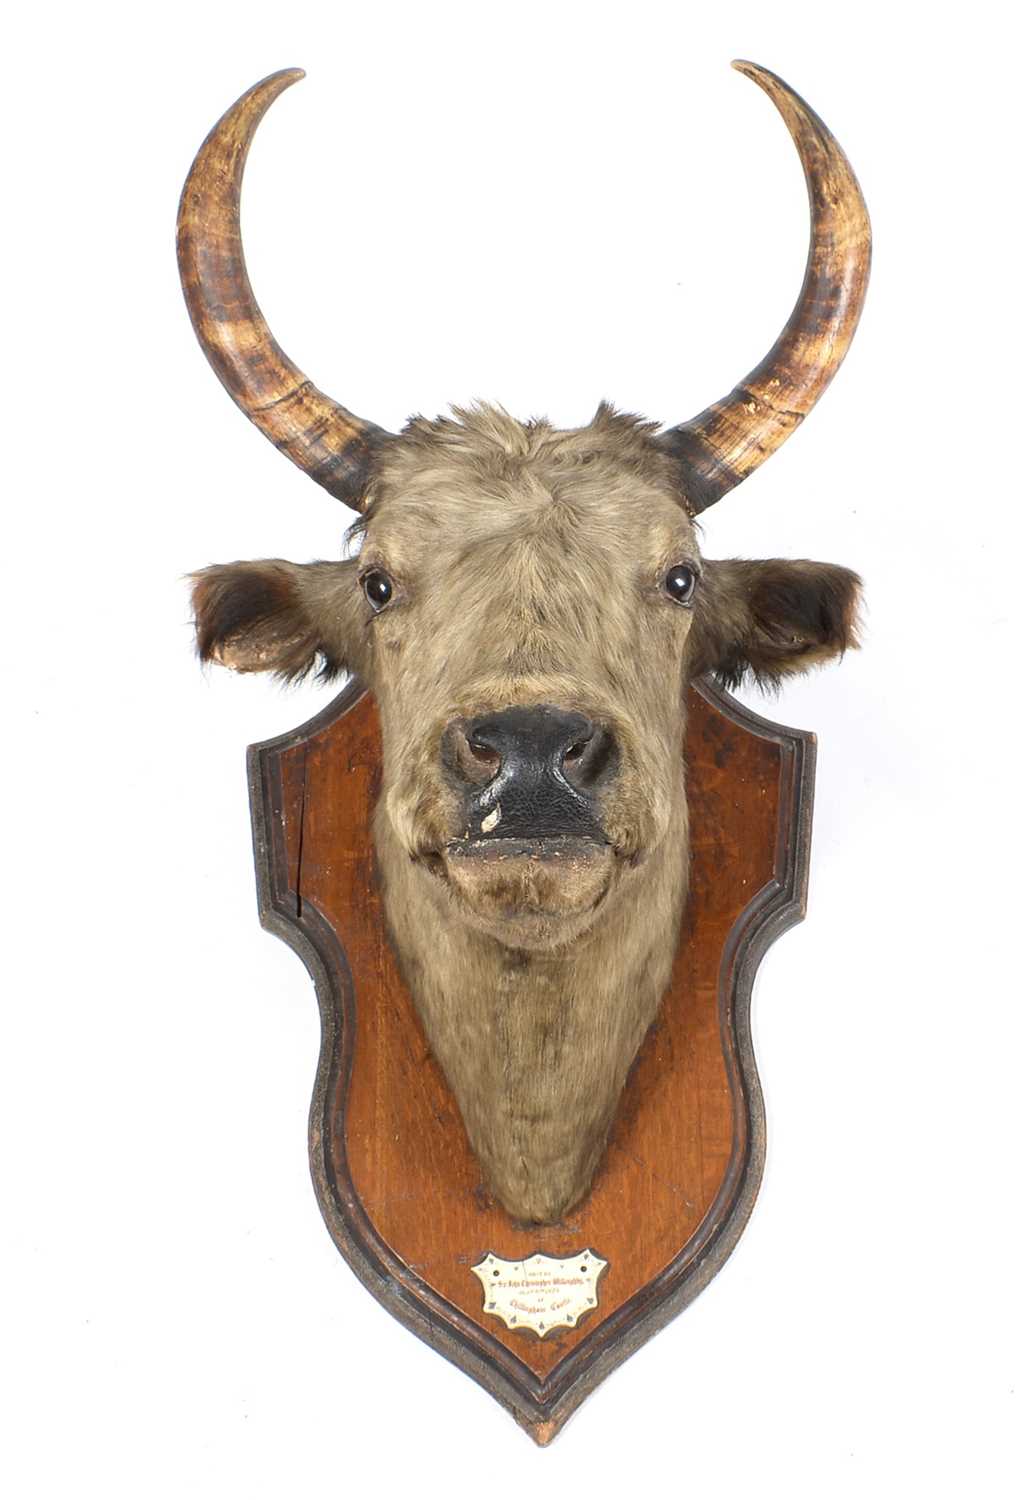 Chillingham wild cattle interest: a stuffed and mounted horned cow's head